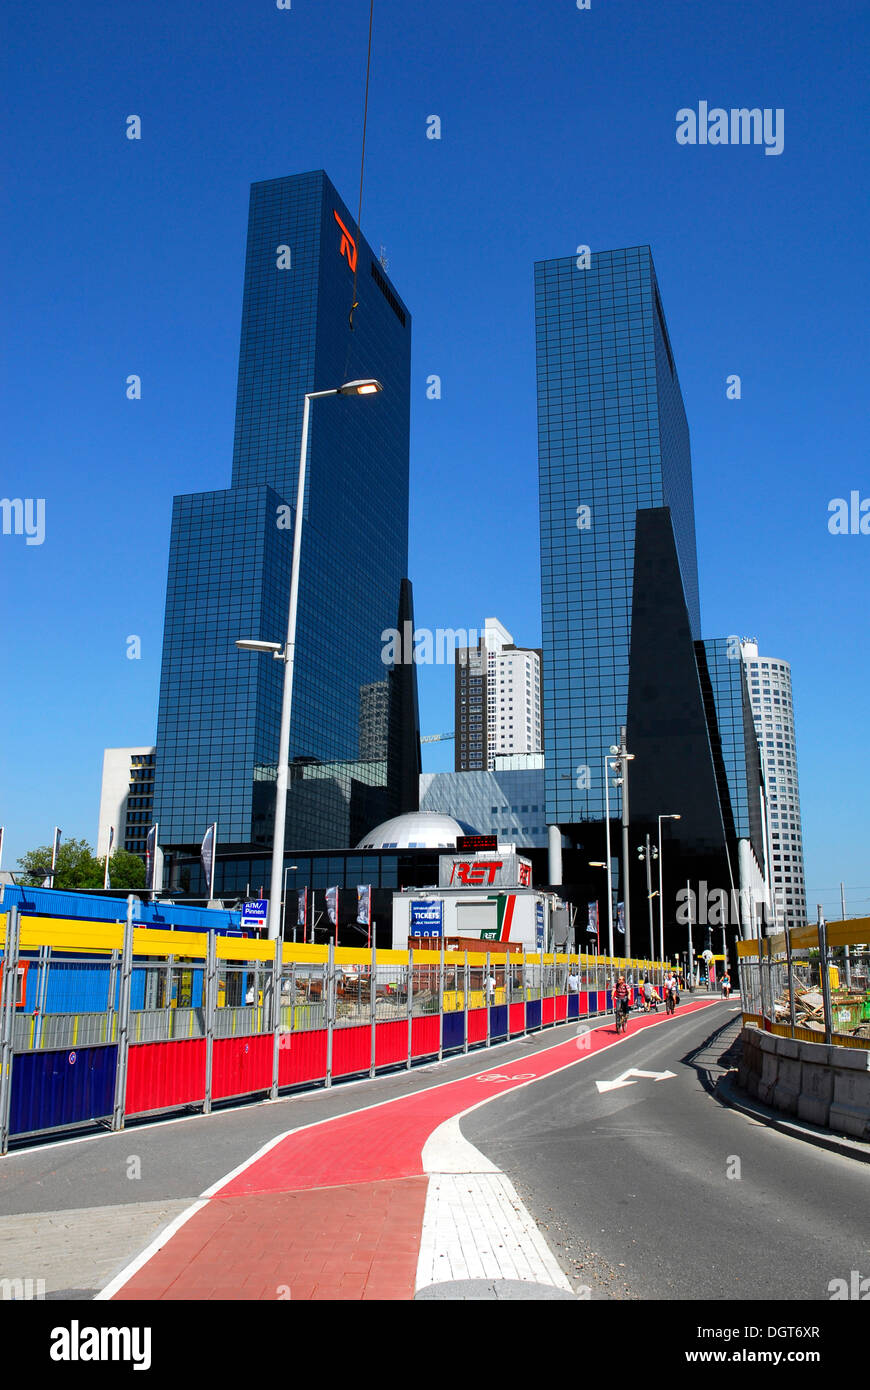 Construction site at the main railway station, Centraal Station, in the back the Delftse Poort office building at the Weena Stock Photo